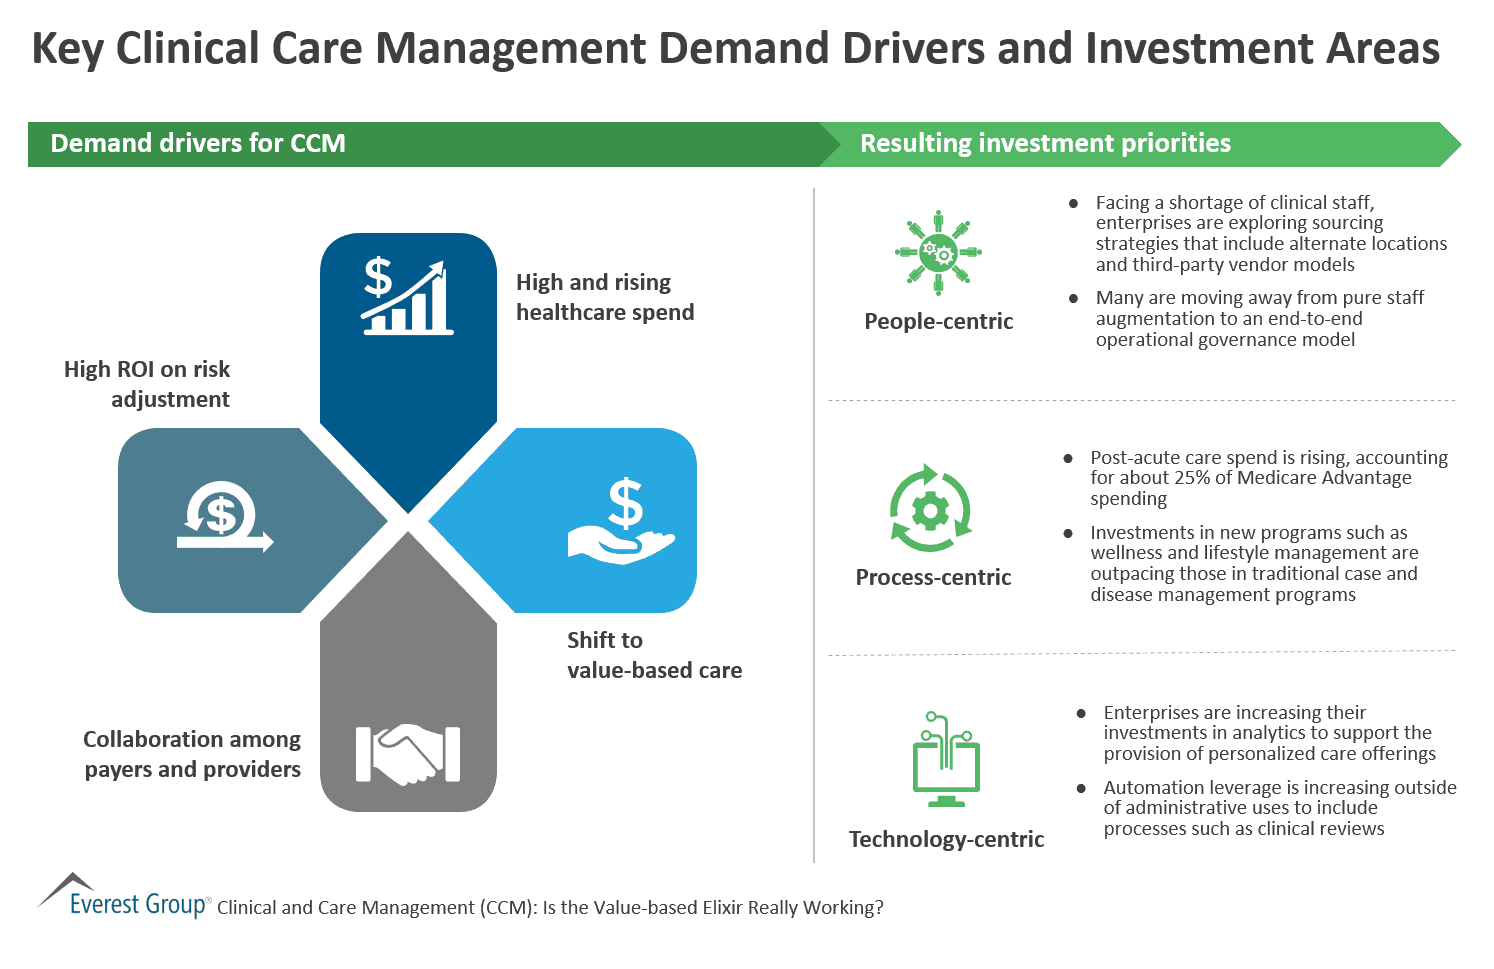 Key Clinical Care Management Demand Drivers and Investment Areas